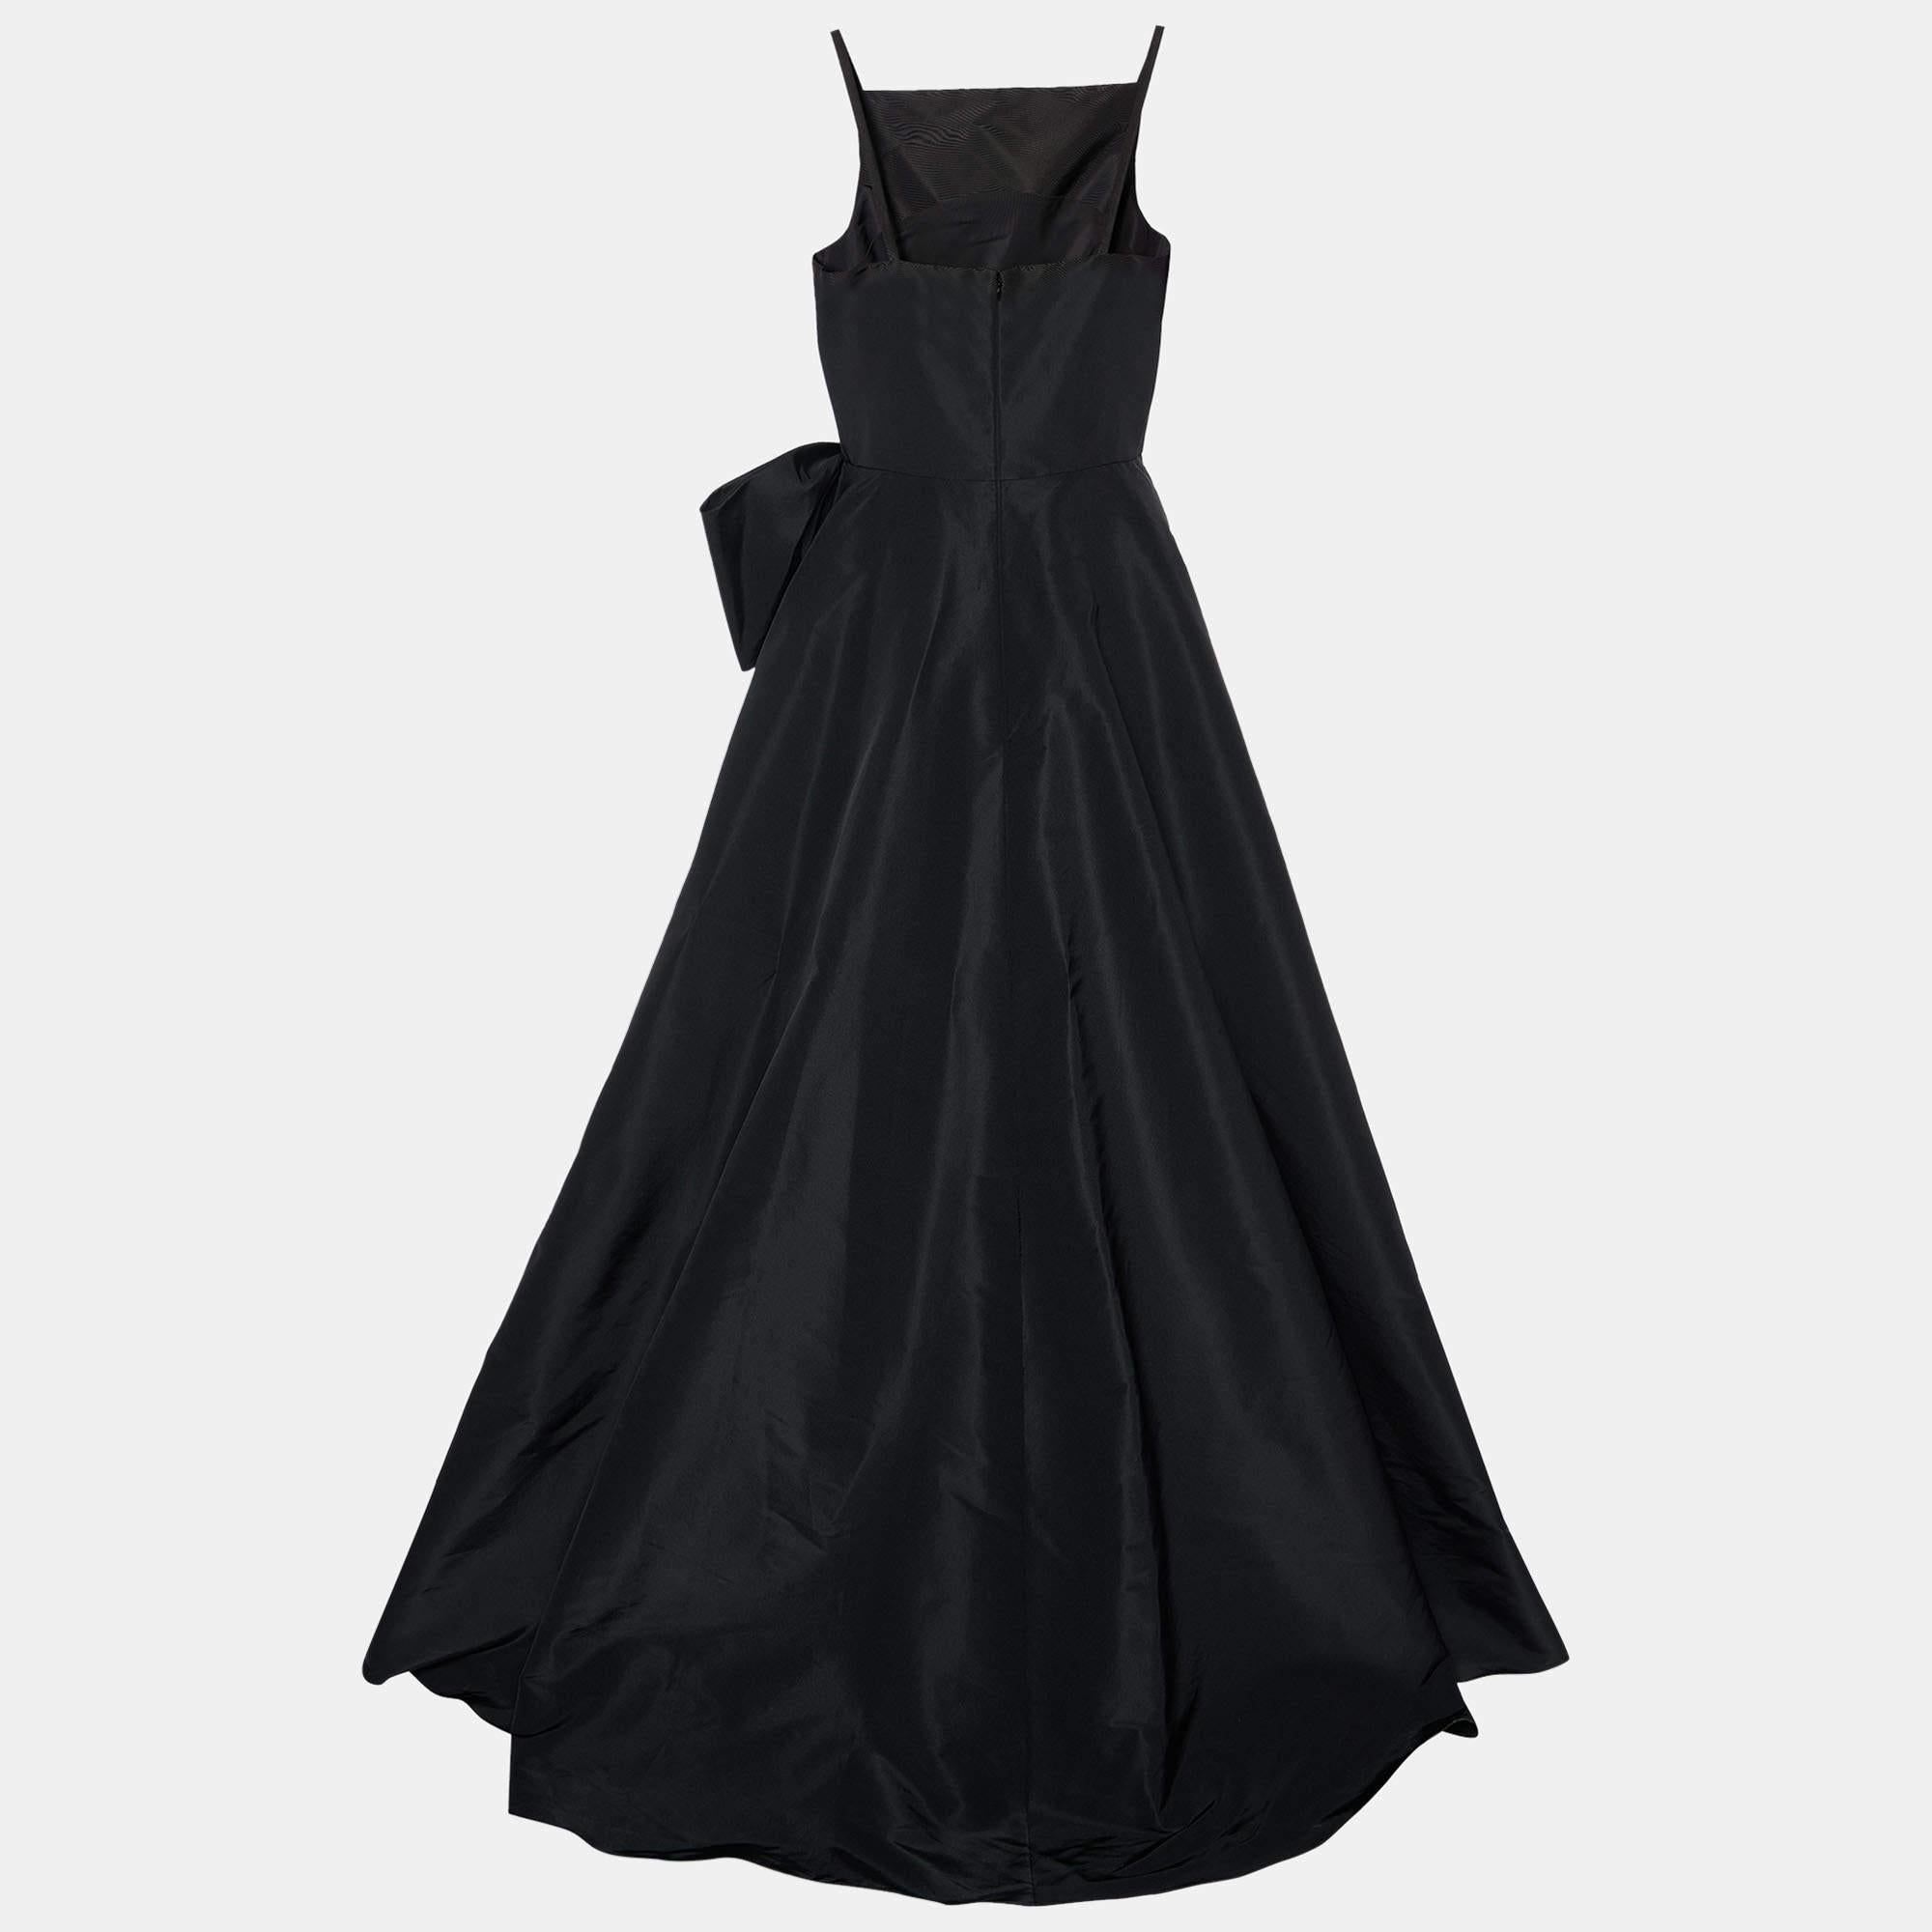 Sway like a dream in this evening gown from Carolina Herrera. Tailored to perfection, the black silk taffeta gown has been draped beautifully and carries a bow detail and a floor-sweeping hemline. Pair it up with simple heels and a statement